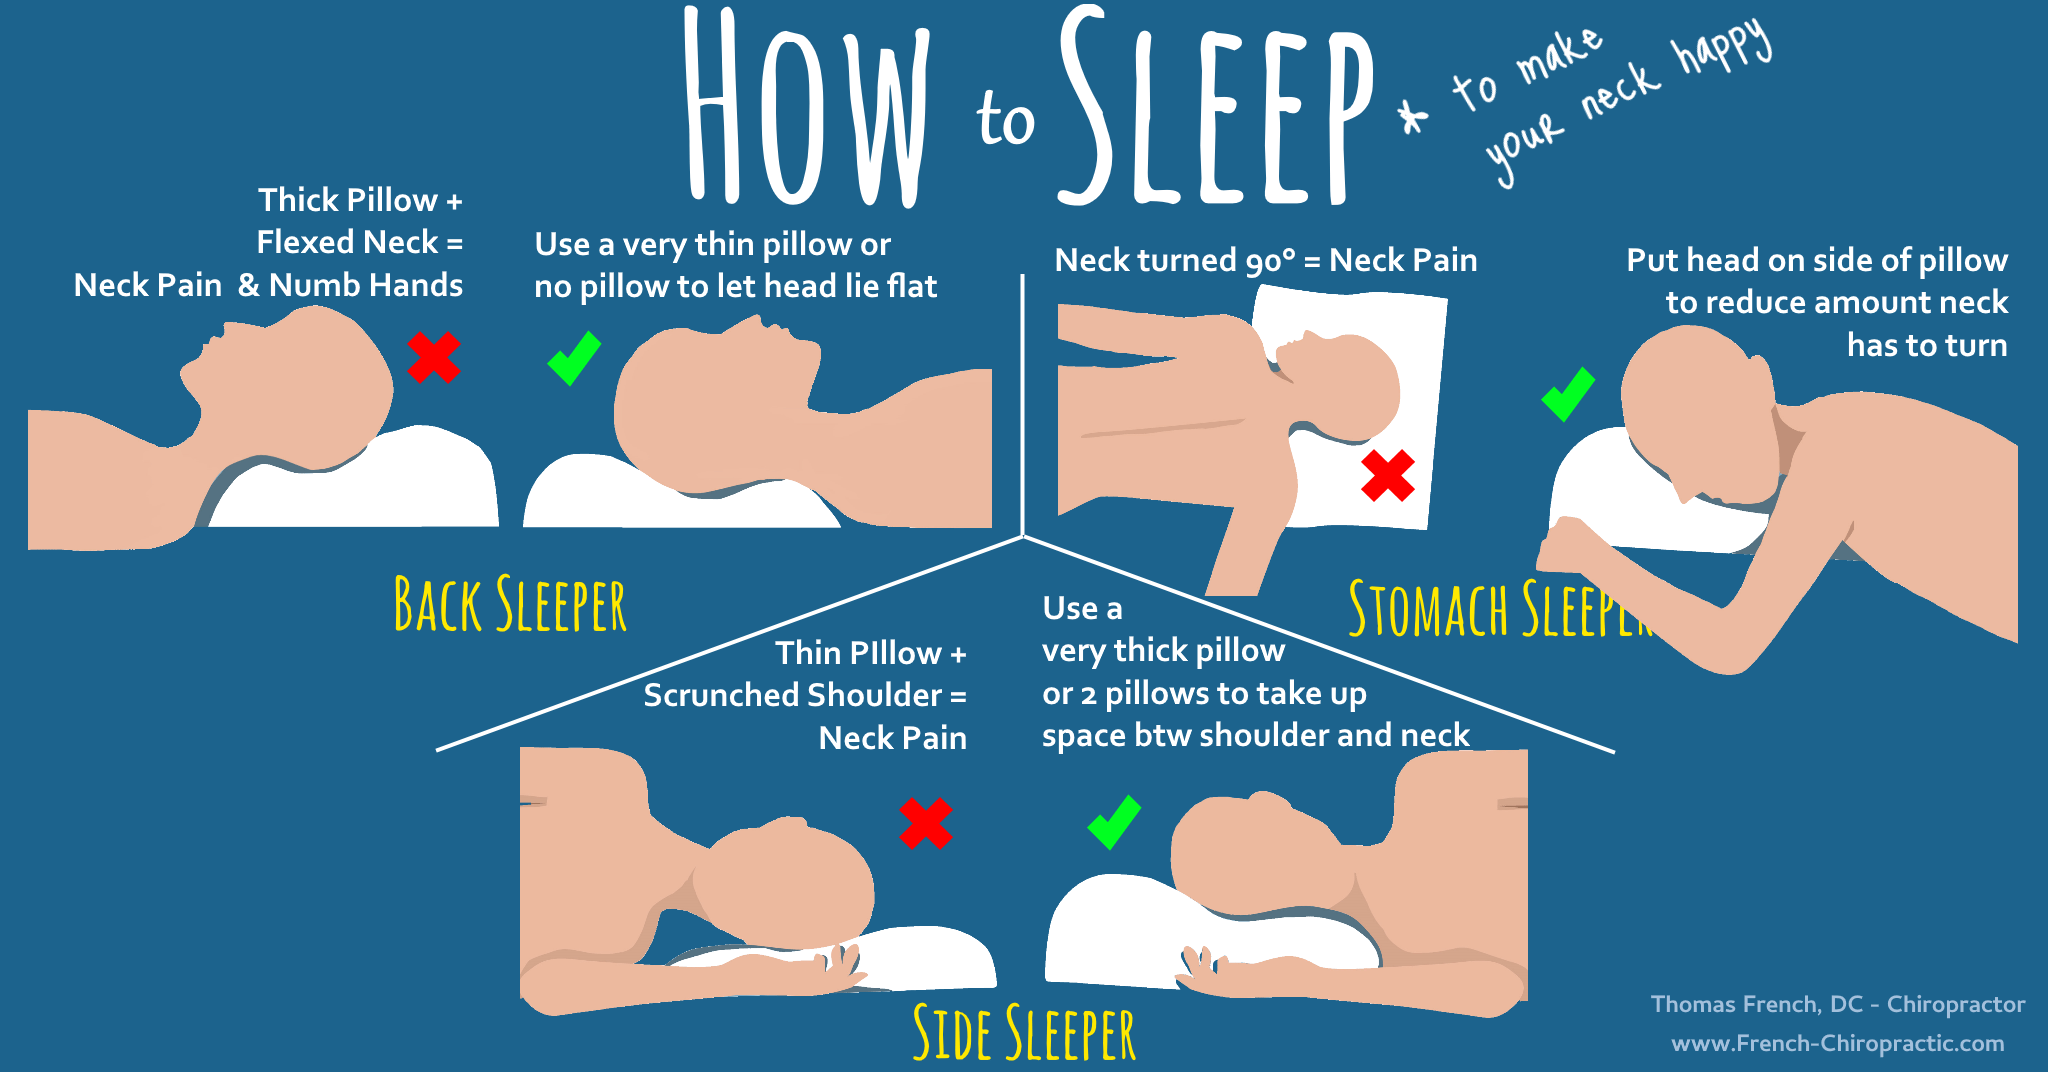 Infographic about How to sleep to reduce morning neck pain and hand numbness. Shows advice to use a thin pillow for back sleepers, a thick pillow for side sleepers, and to sleep on the edge of a pillow for stomach sleepers.